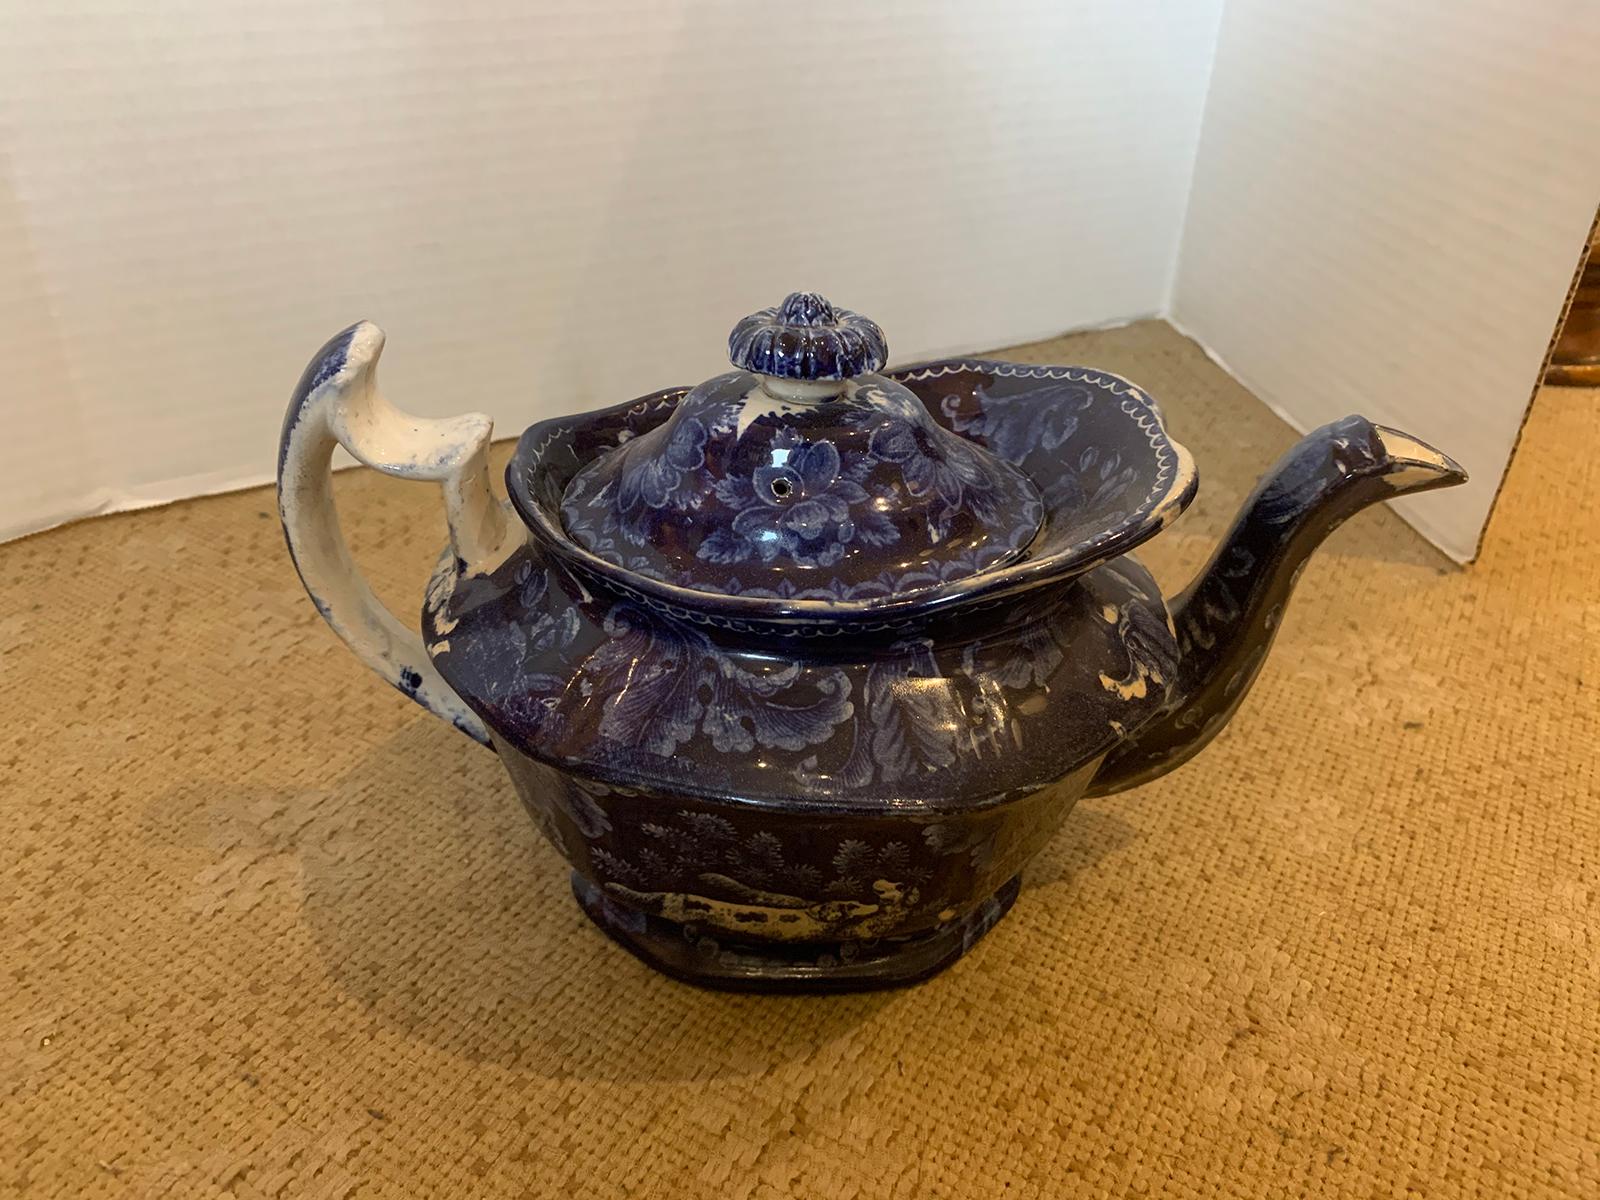 Ralph & James Clews Marked English Staffordshire Transferware Teapot, circa 1825 For Sale 10